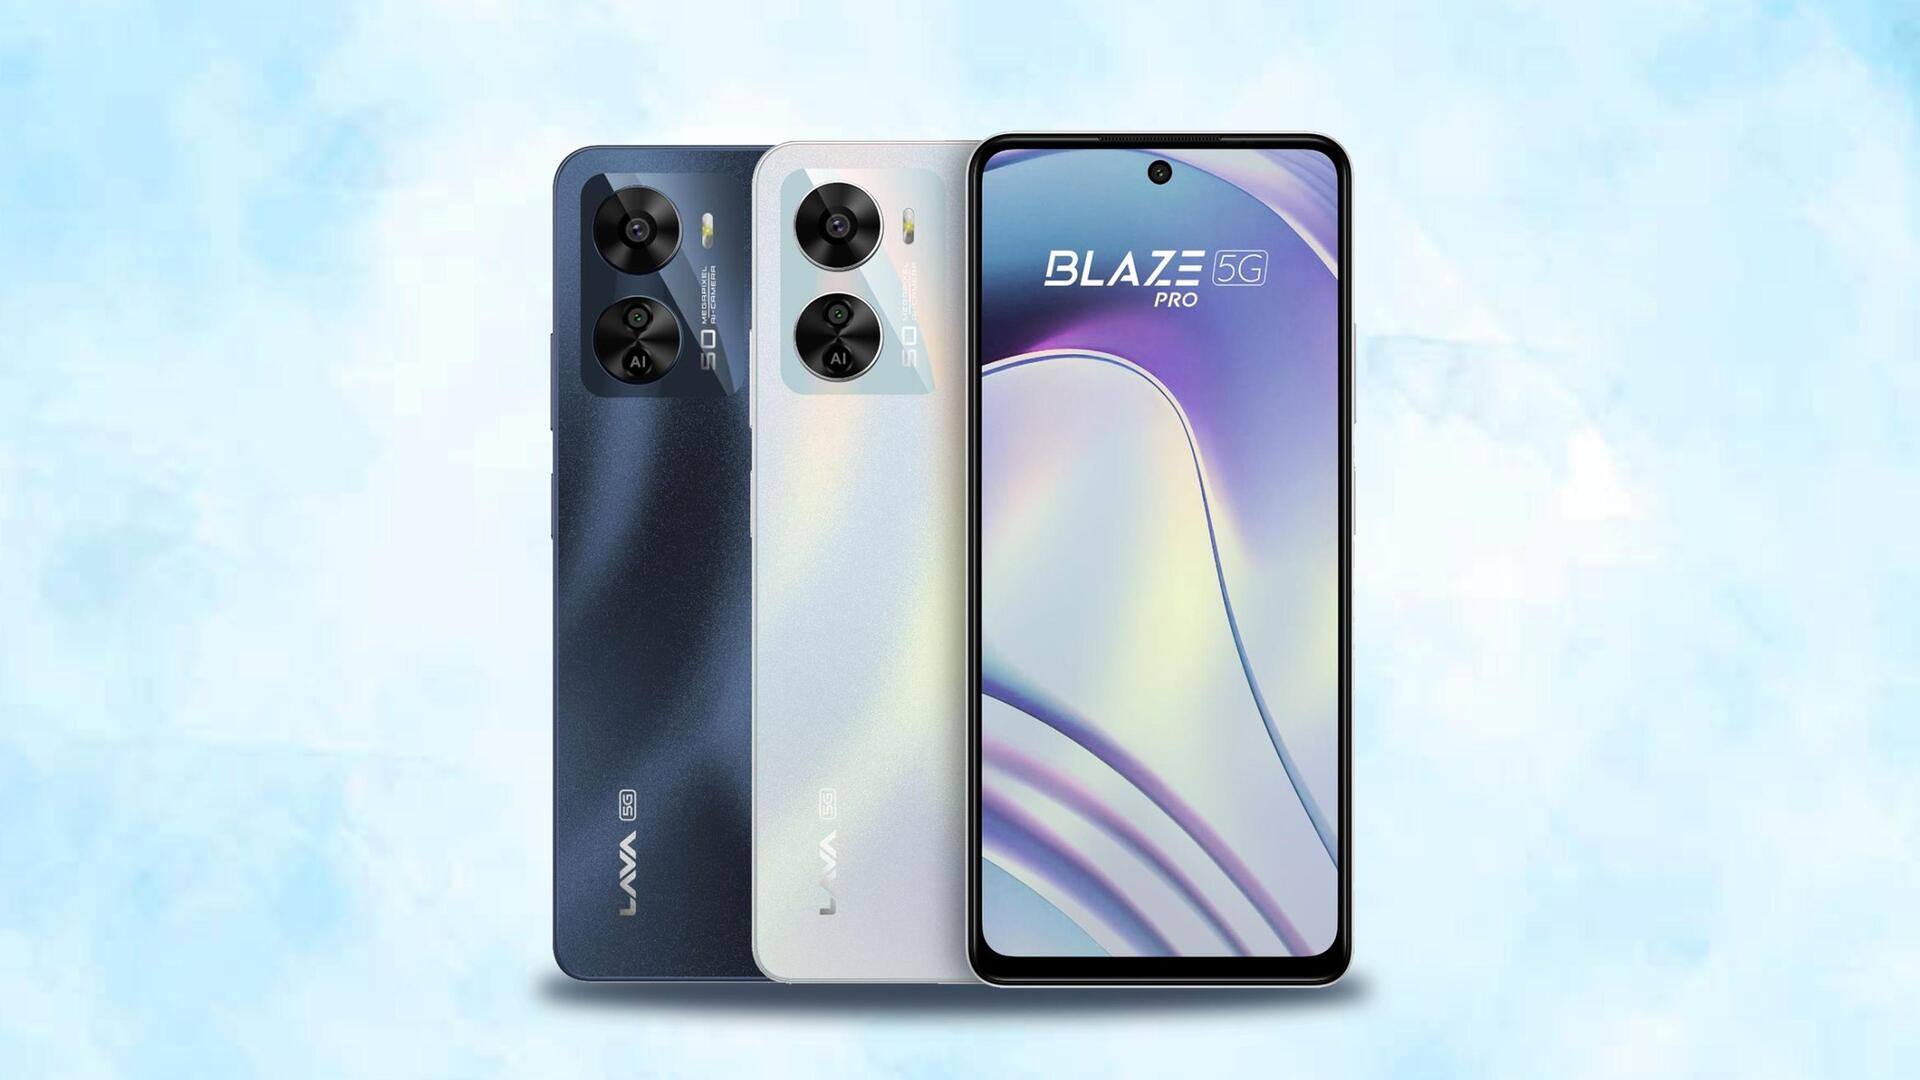 Lava Blaze Pro 5G debuts in India at Rs. 12,500